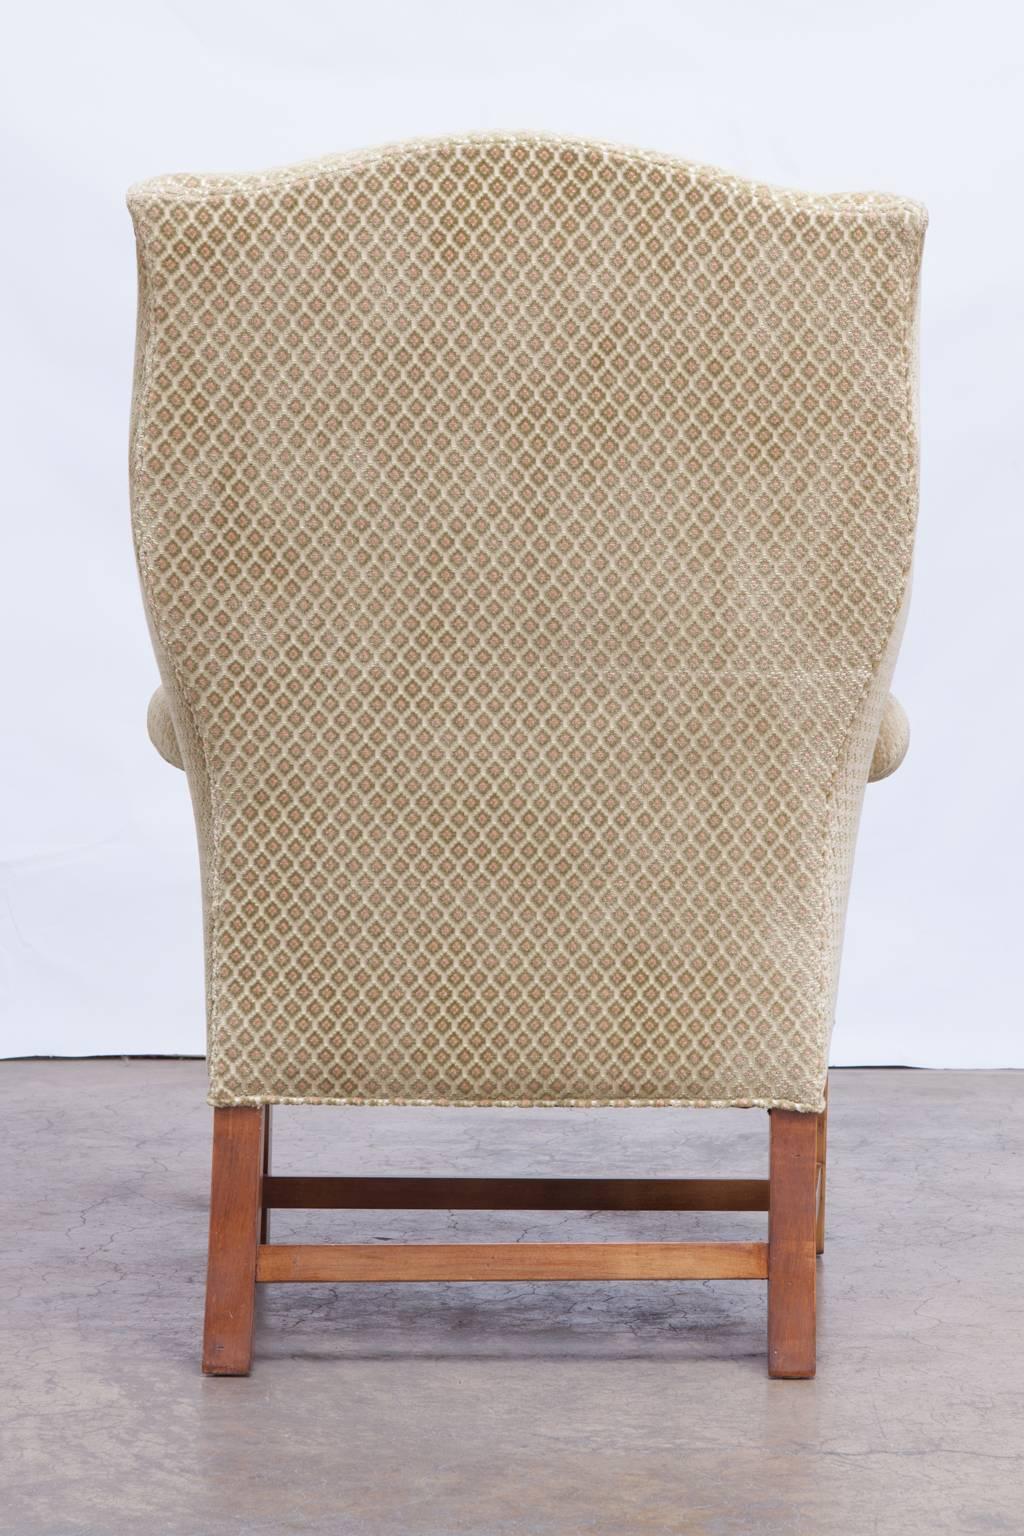 20th Century Chippendale Style Mahogany Framed Wing Chair by Baker